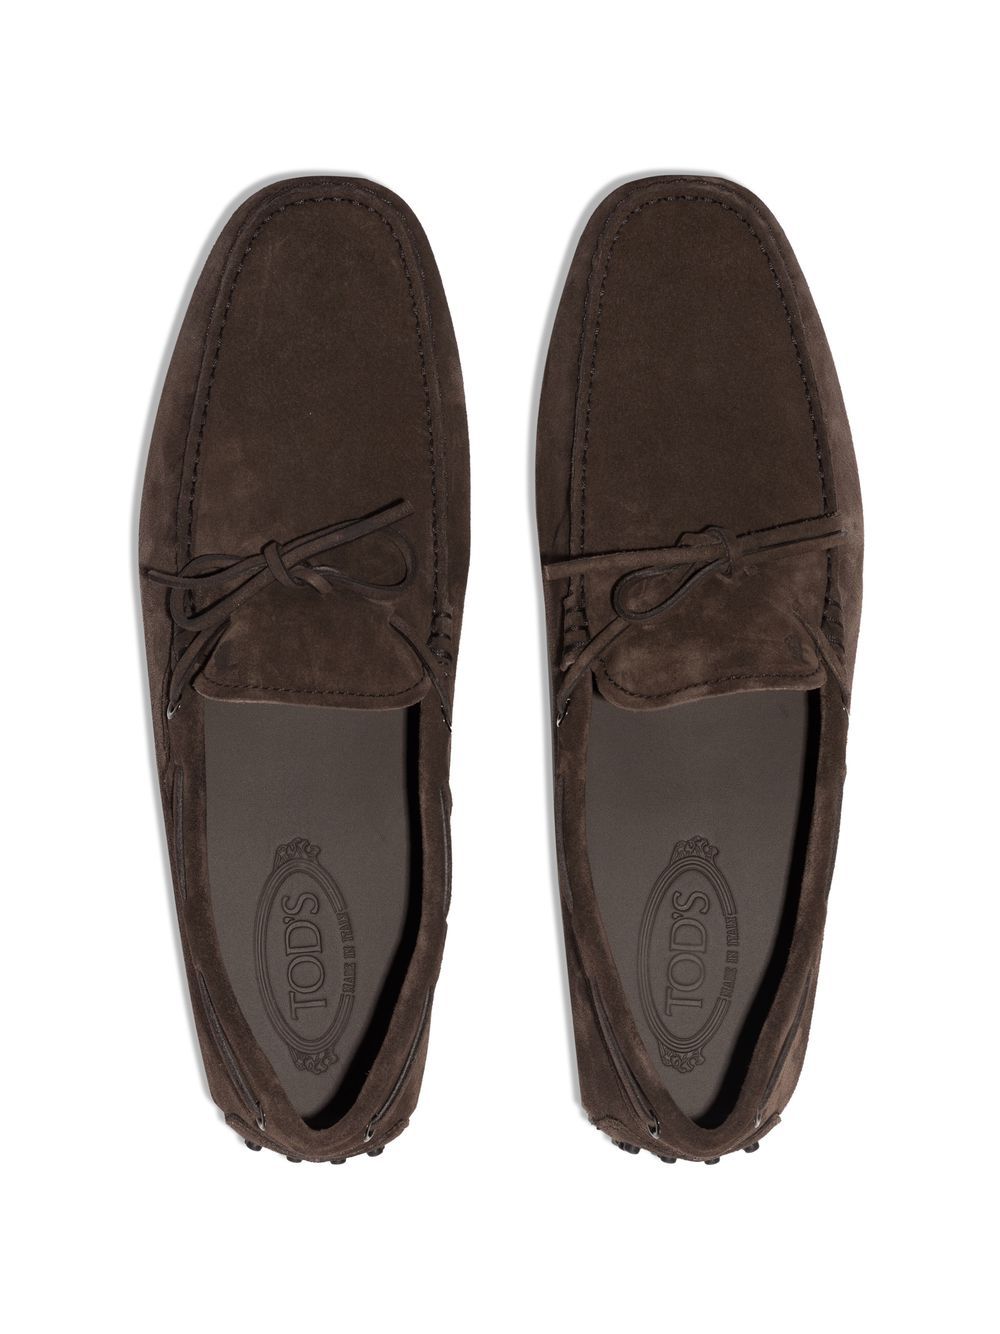 Tod's Flat Shoes   Marrone Scuro